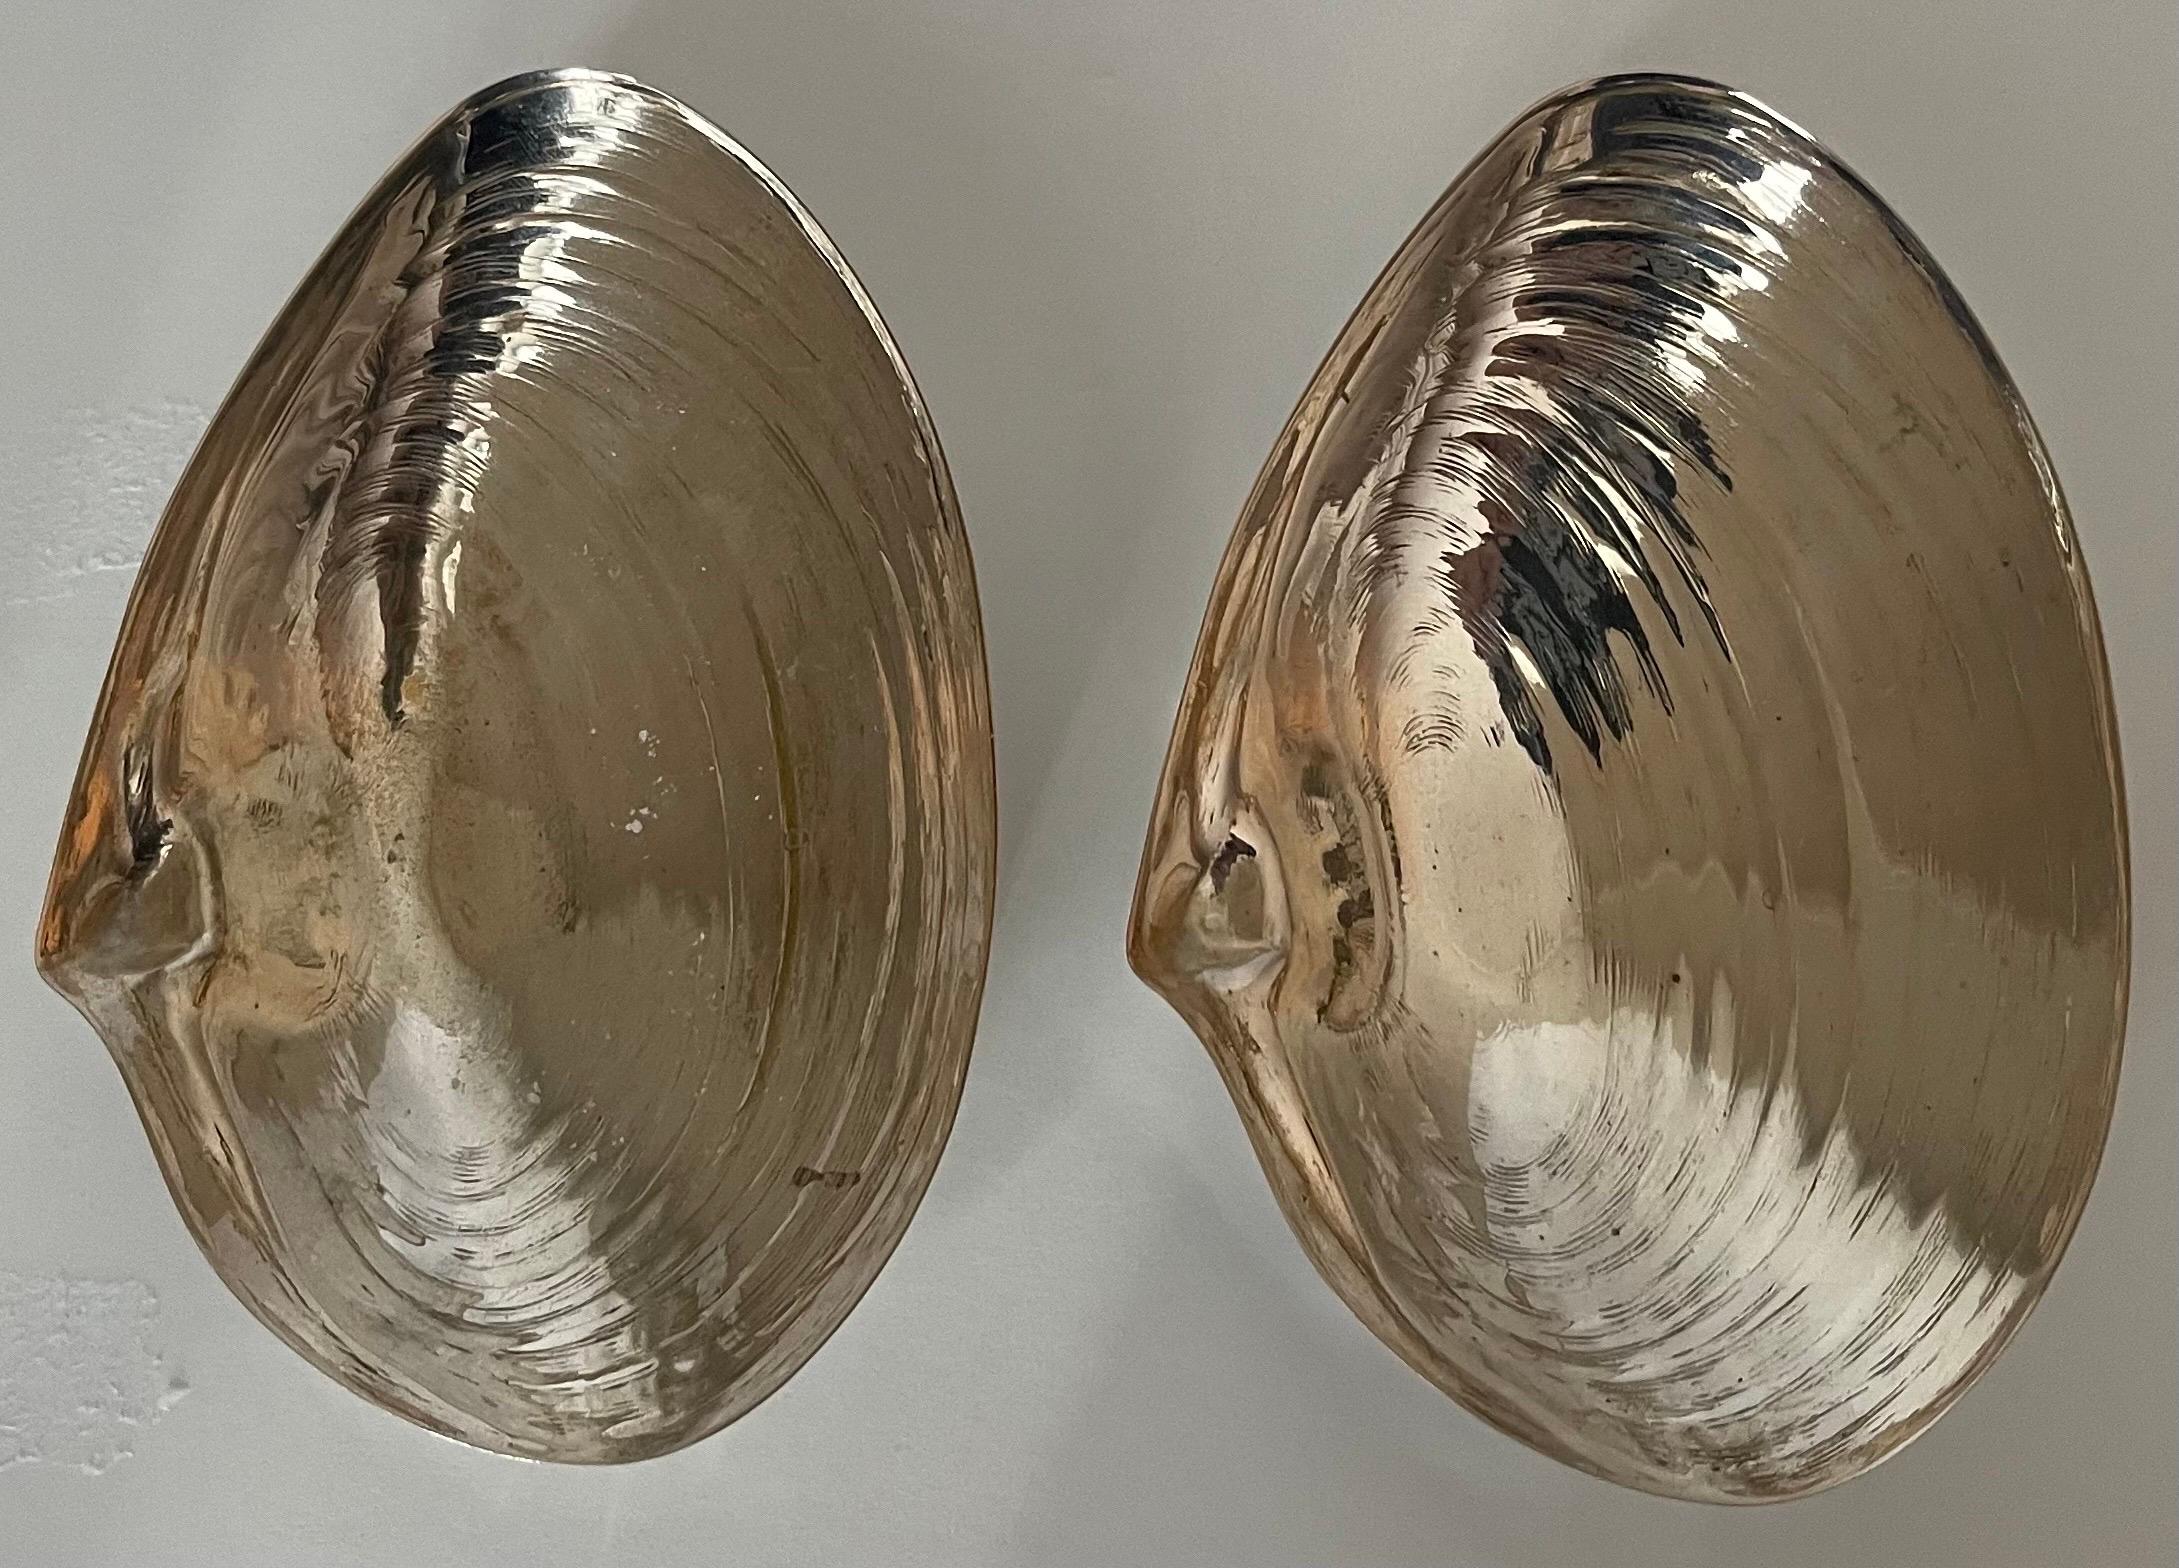 Silver Plated Shell Form Candy Dishes or Ashtrays, Pair For Sale 4